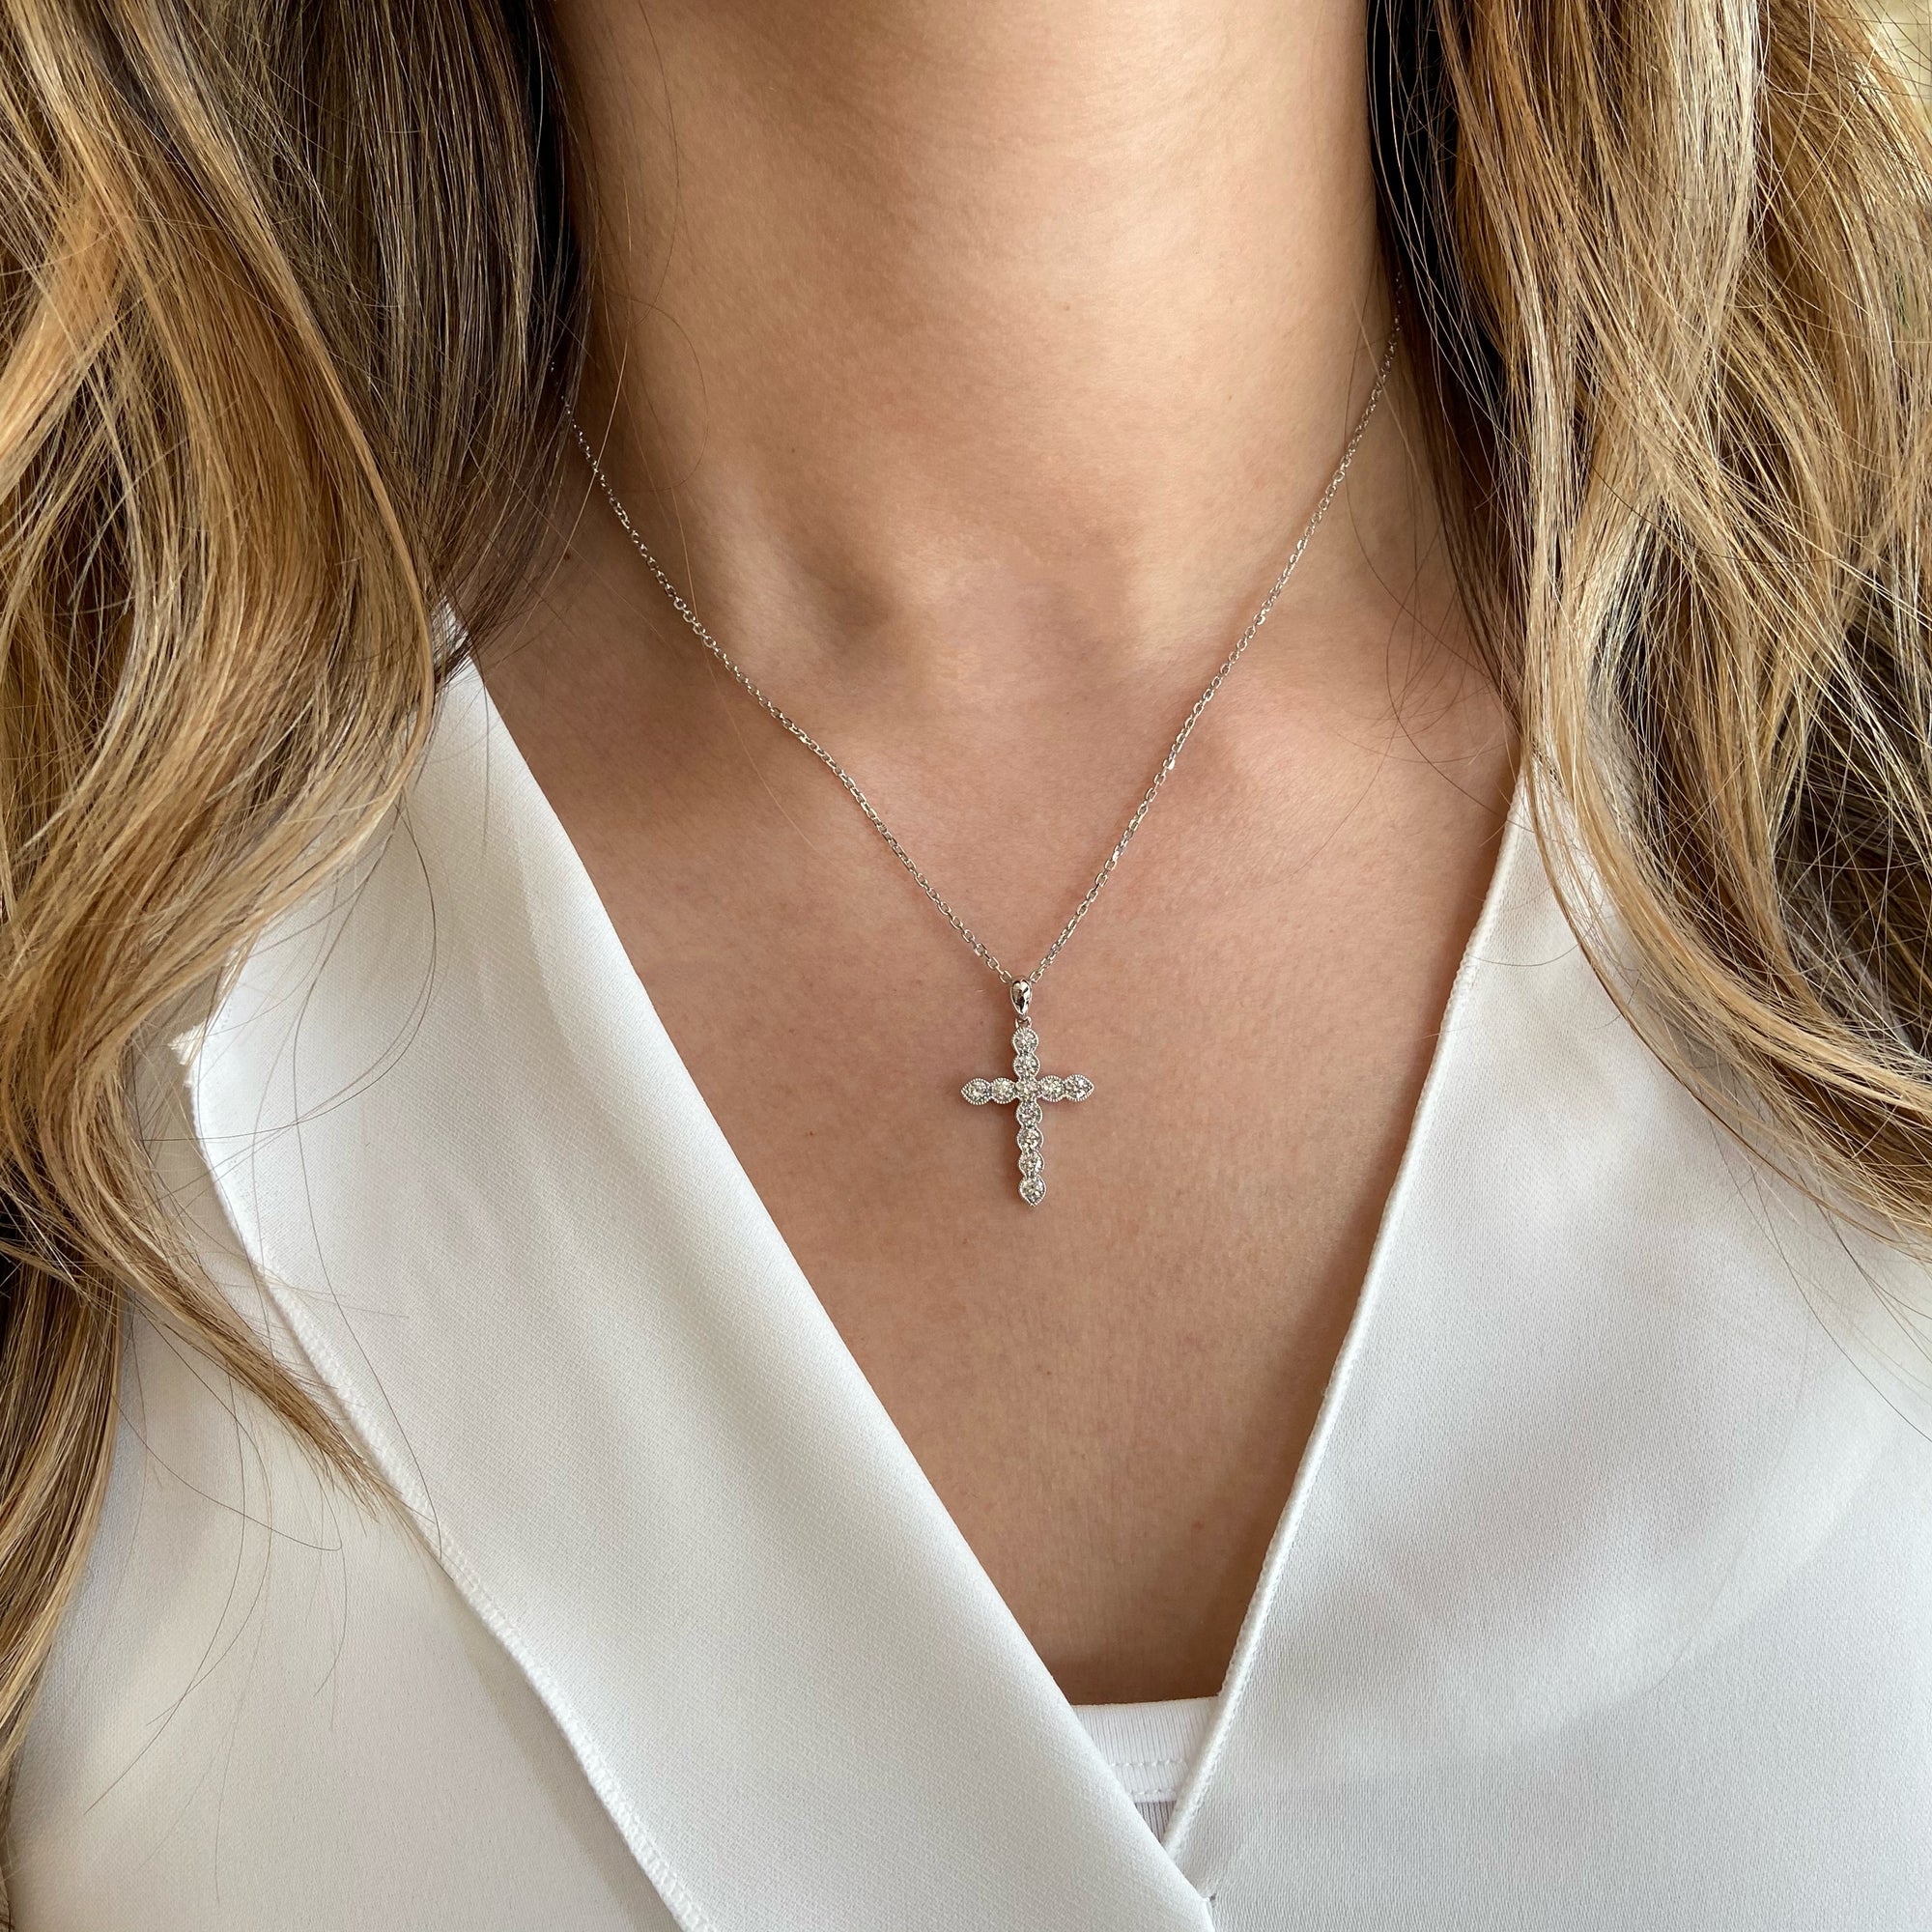 Bezel-Set Diamond Cross Pendant with Antique Milgrain  The perfect gift for a christening, communion, confirmation, birthday, or holiday.  -14K gold weighing 3.80 grams  -11 round bezel-set brilliant diamonds k 0.62 carats